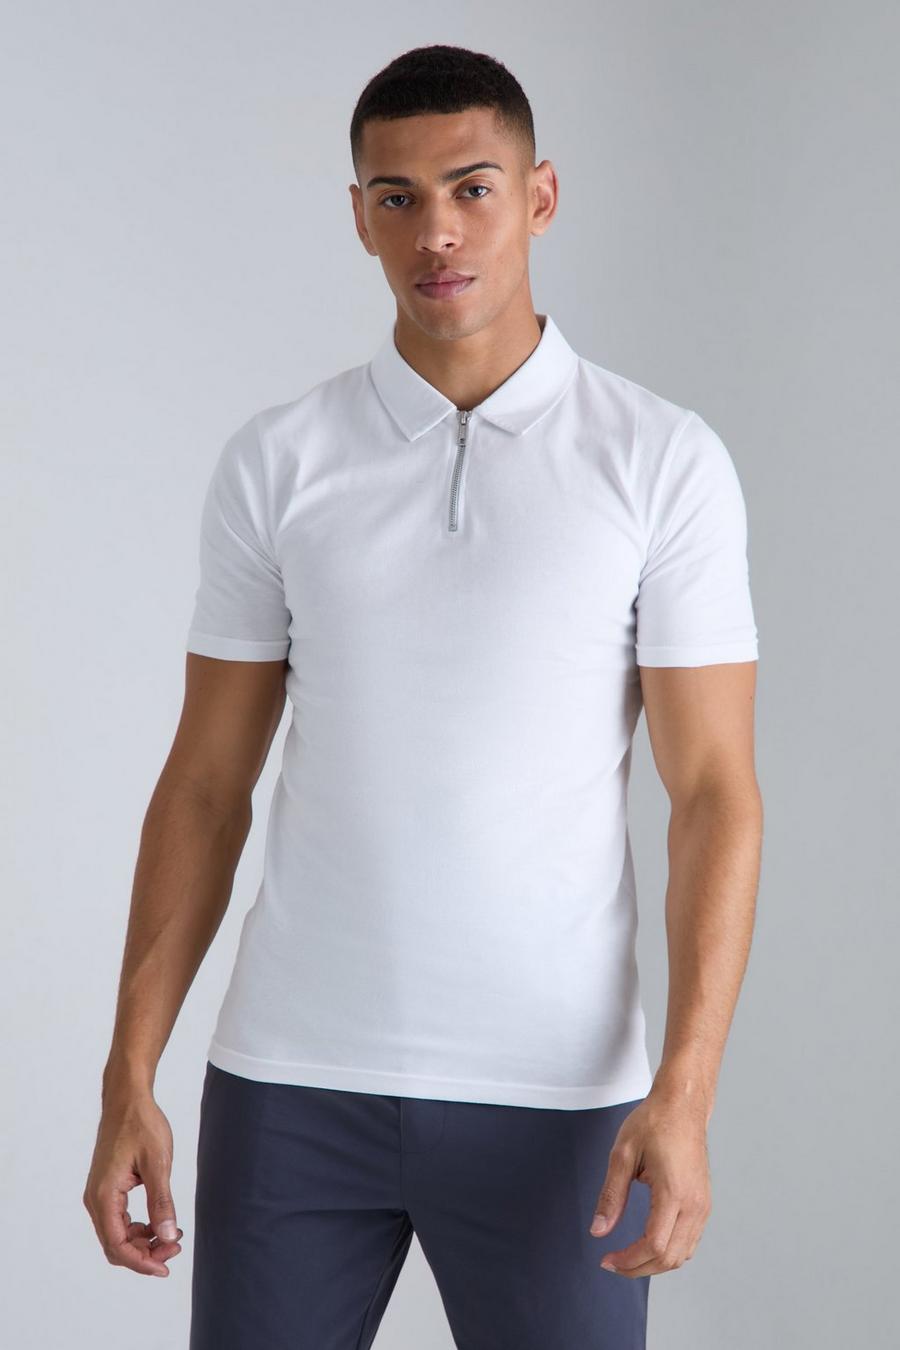 White Muscle Zip Neck Polo